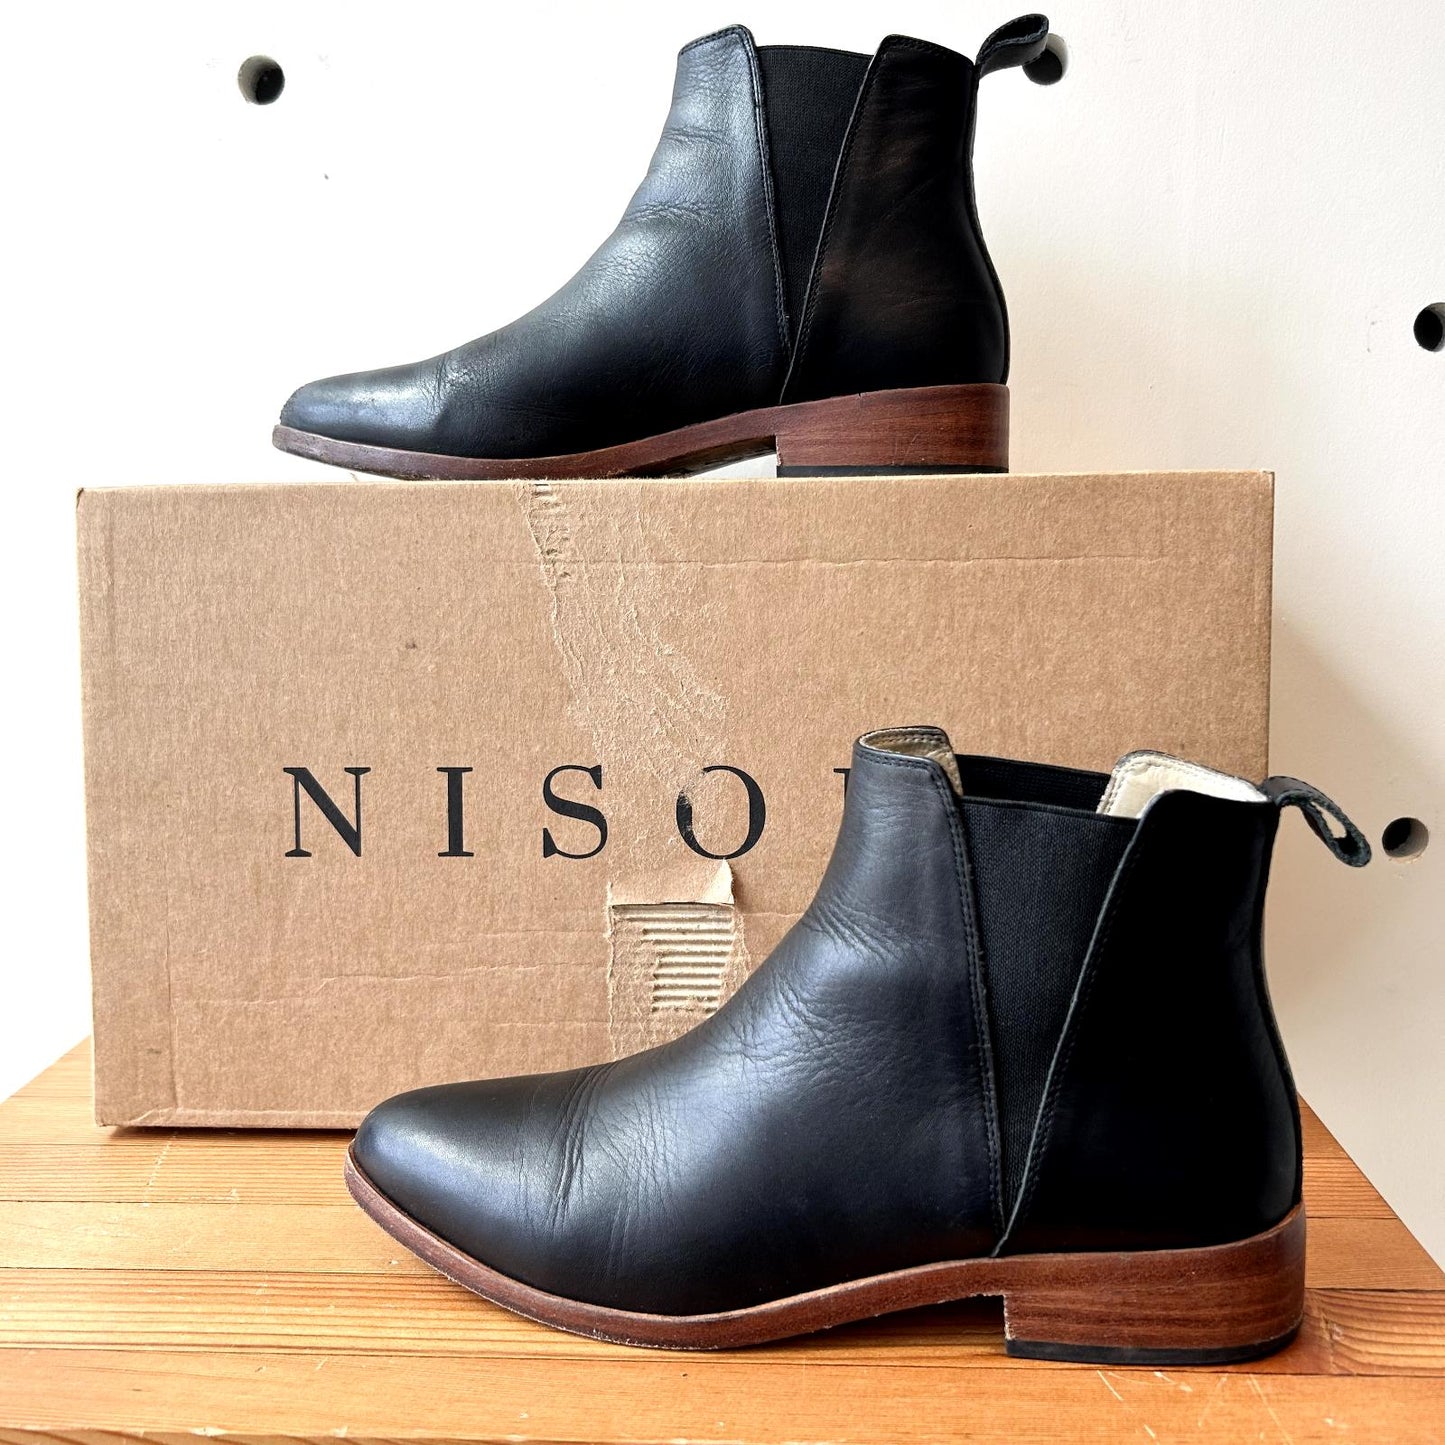 7 - Nisolo Black Smooth Leather Everyday Chelsea Ankle Boots w/ Box 0407DS